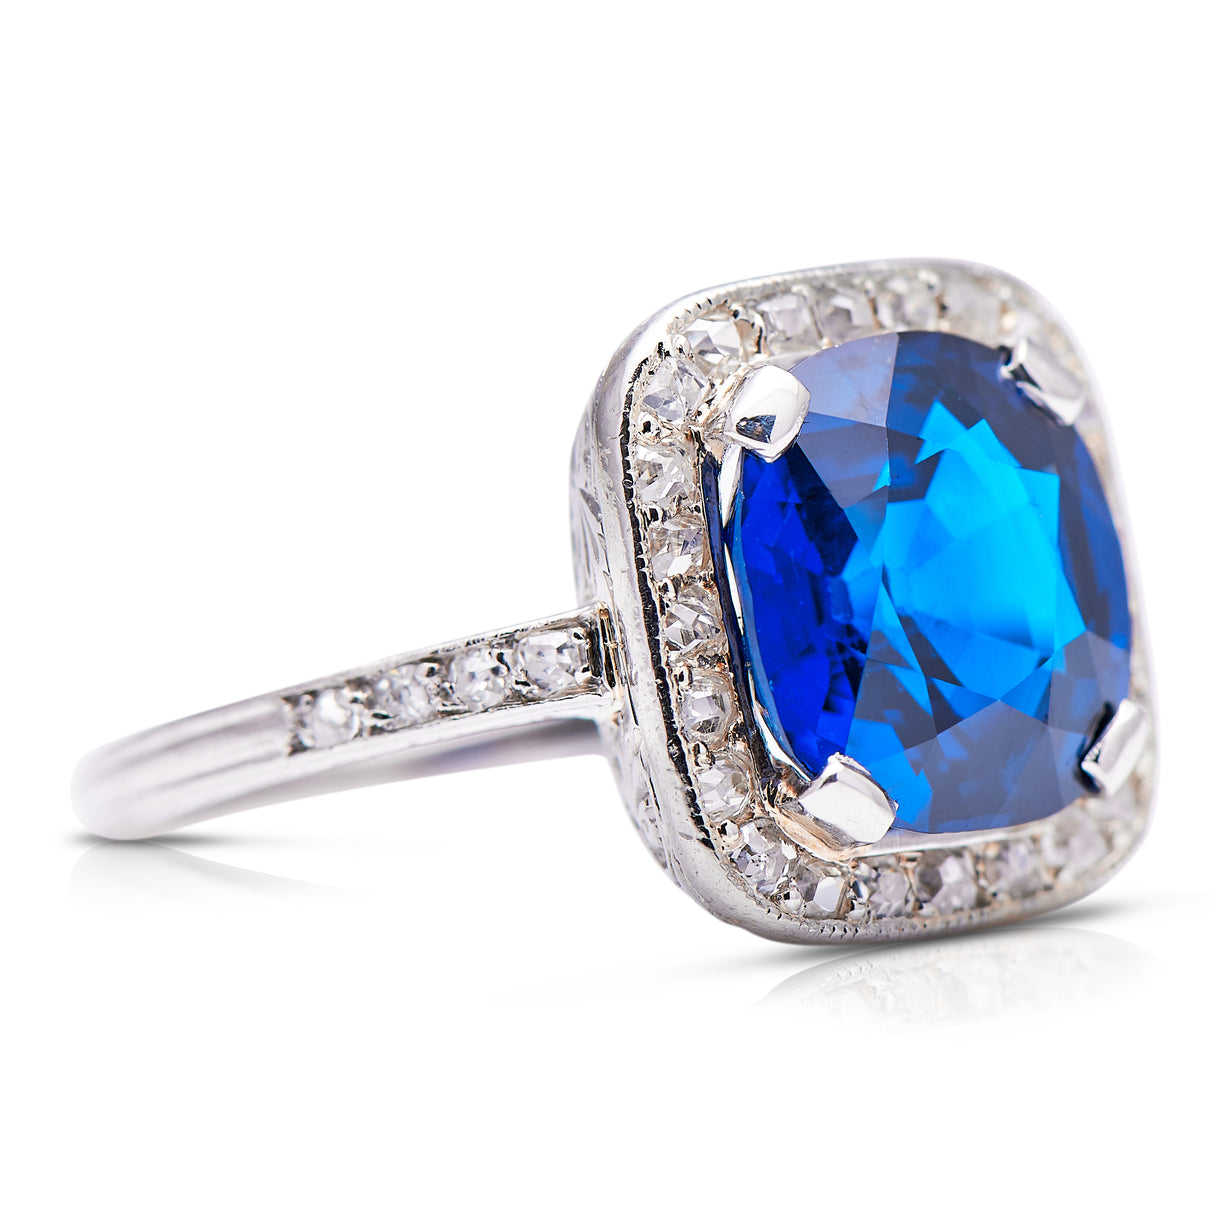 Engagement | Art Deco, Royal Blue Sapphire and Diamond Ring